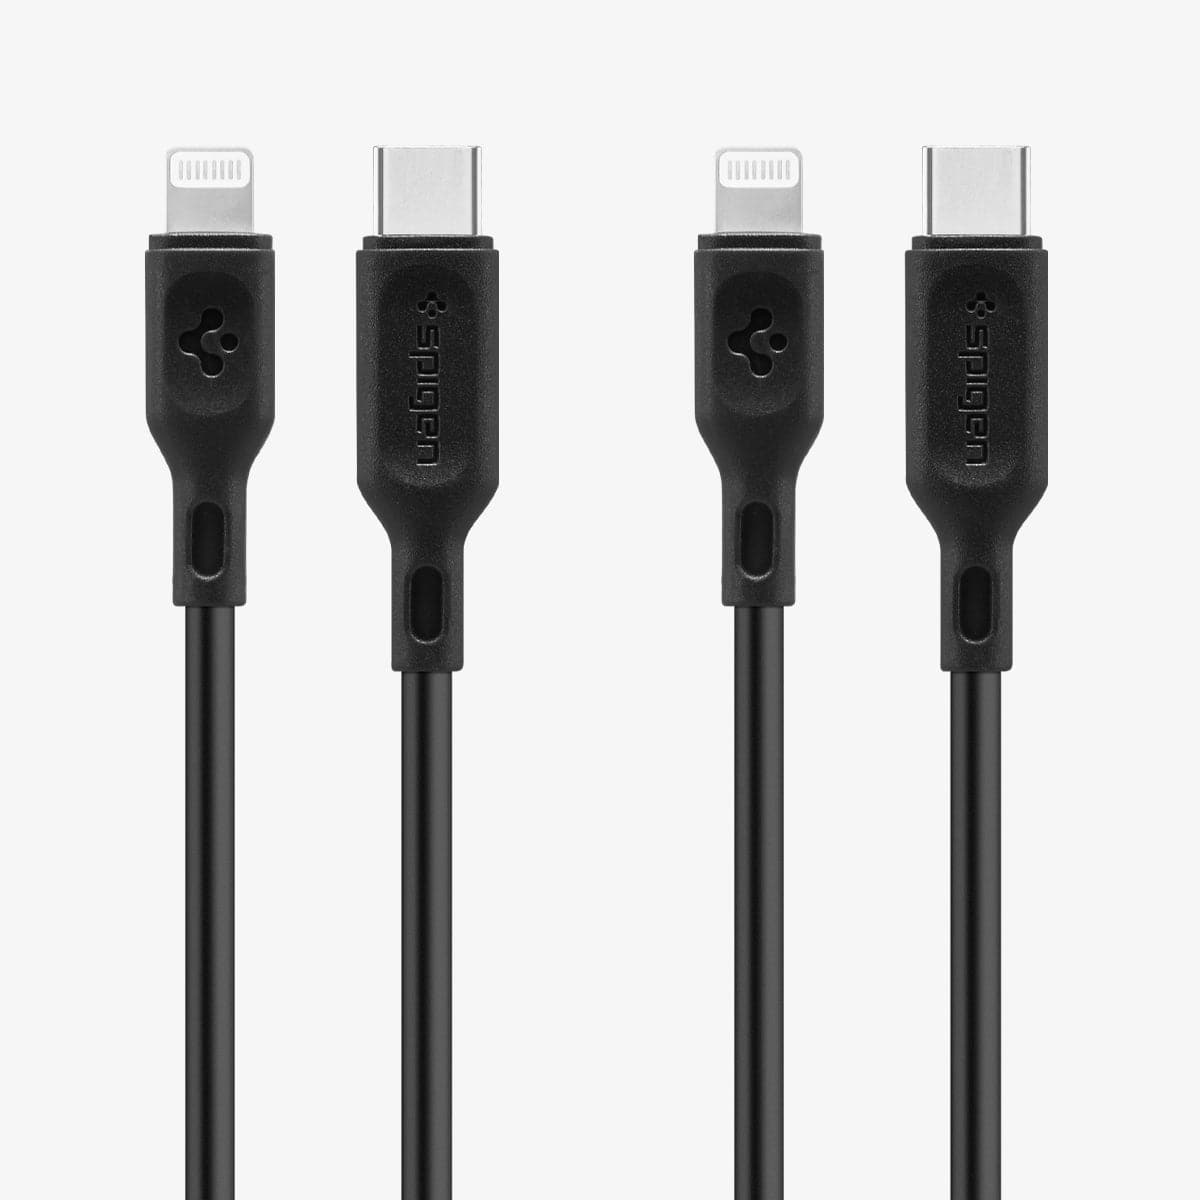 000CA27022 - DuraSync USB-C to Lightning Cable 2 Pack in black showing the lightning cable end and the USB-C end 2 pack